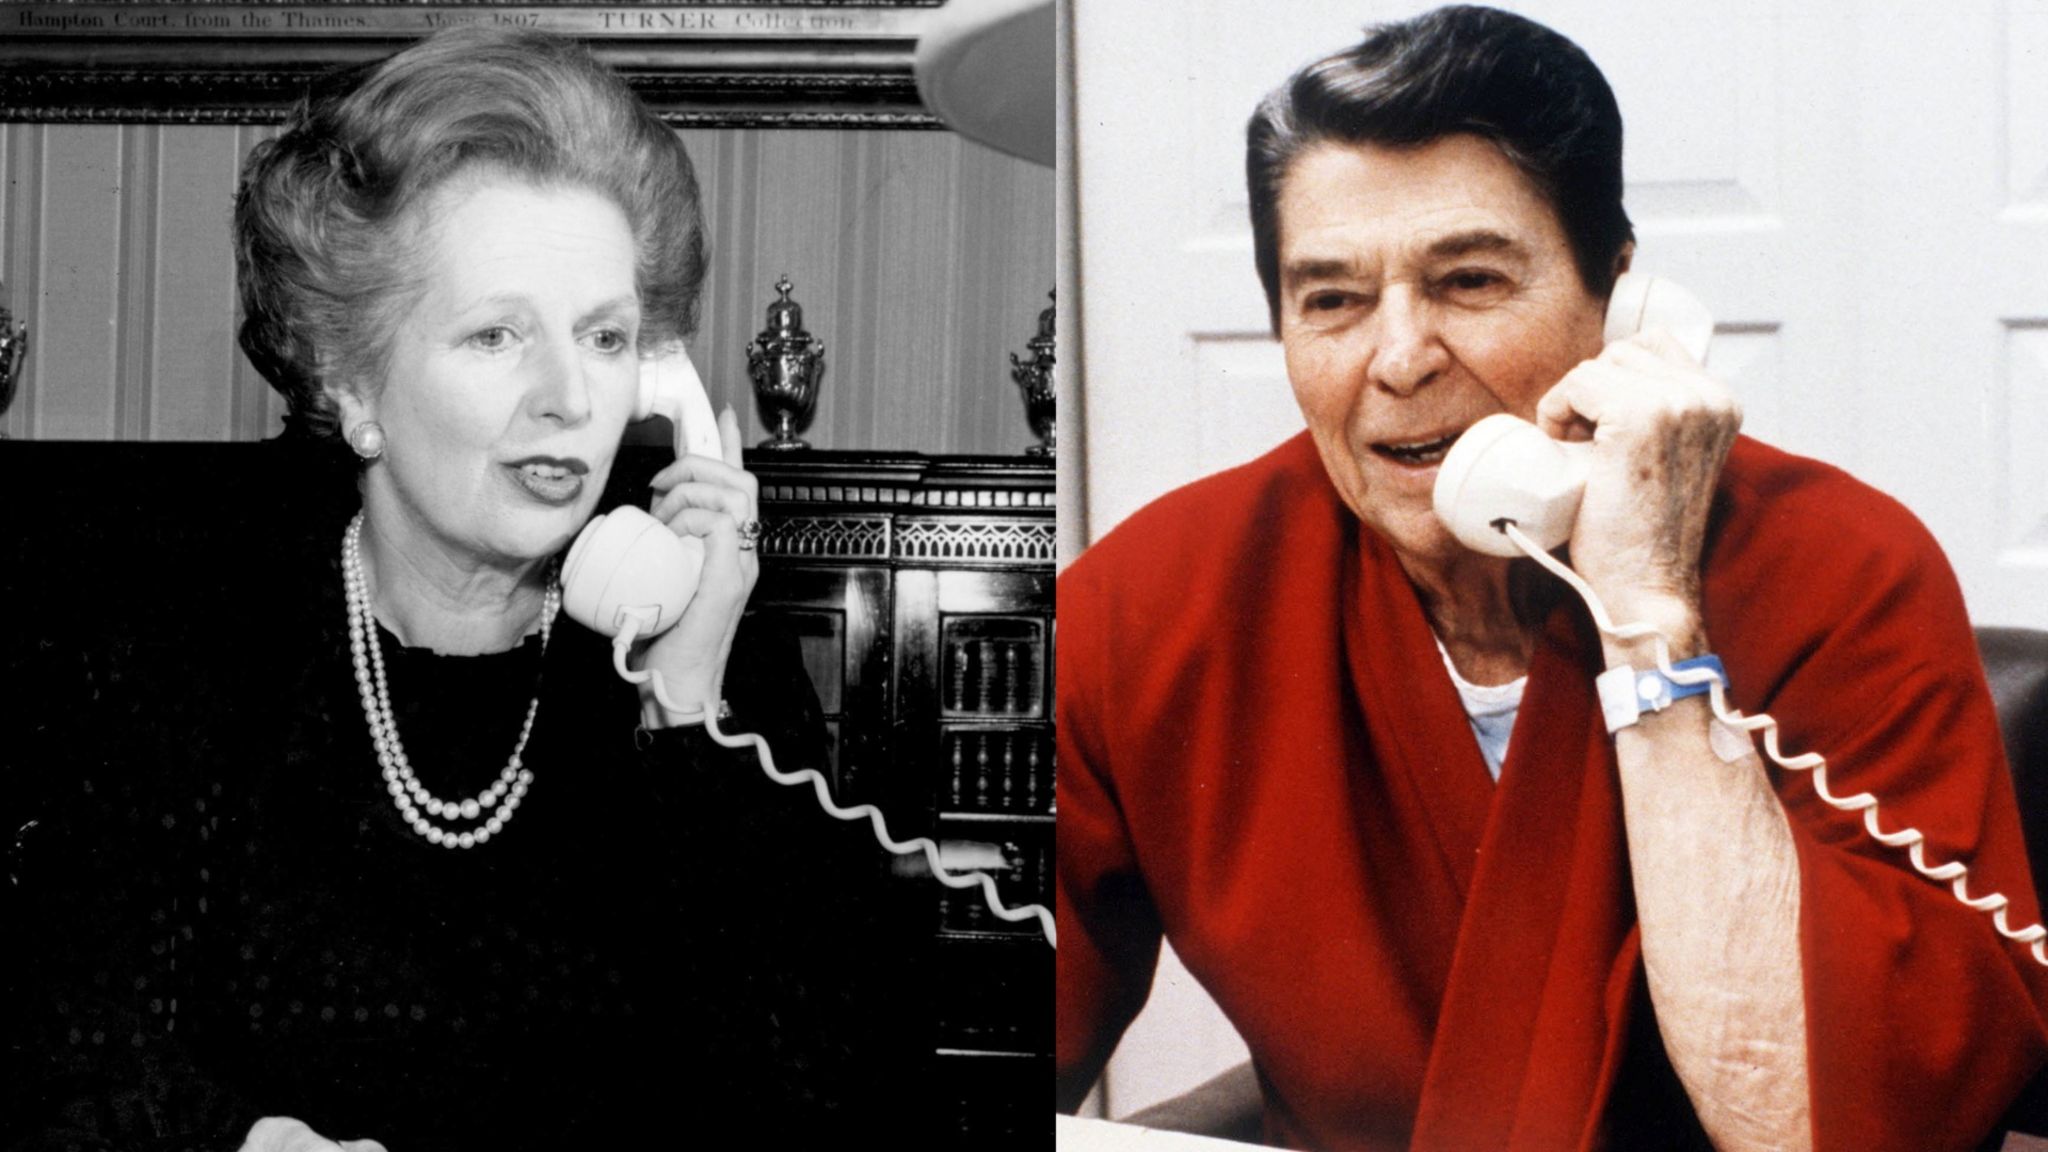 Separate images of UK prime minister Margaret Thatcher and US president Ronald Reagan both on the telephone